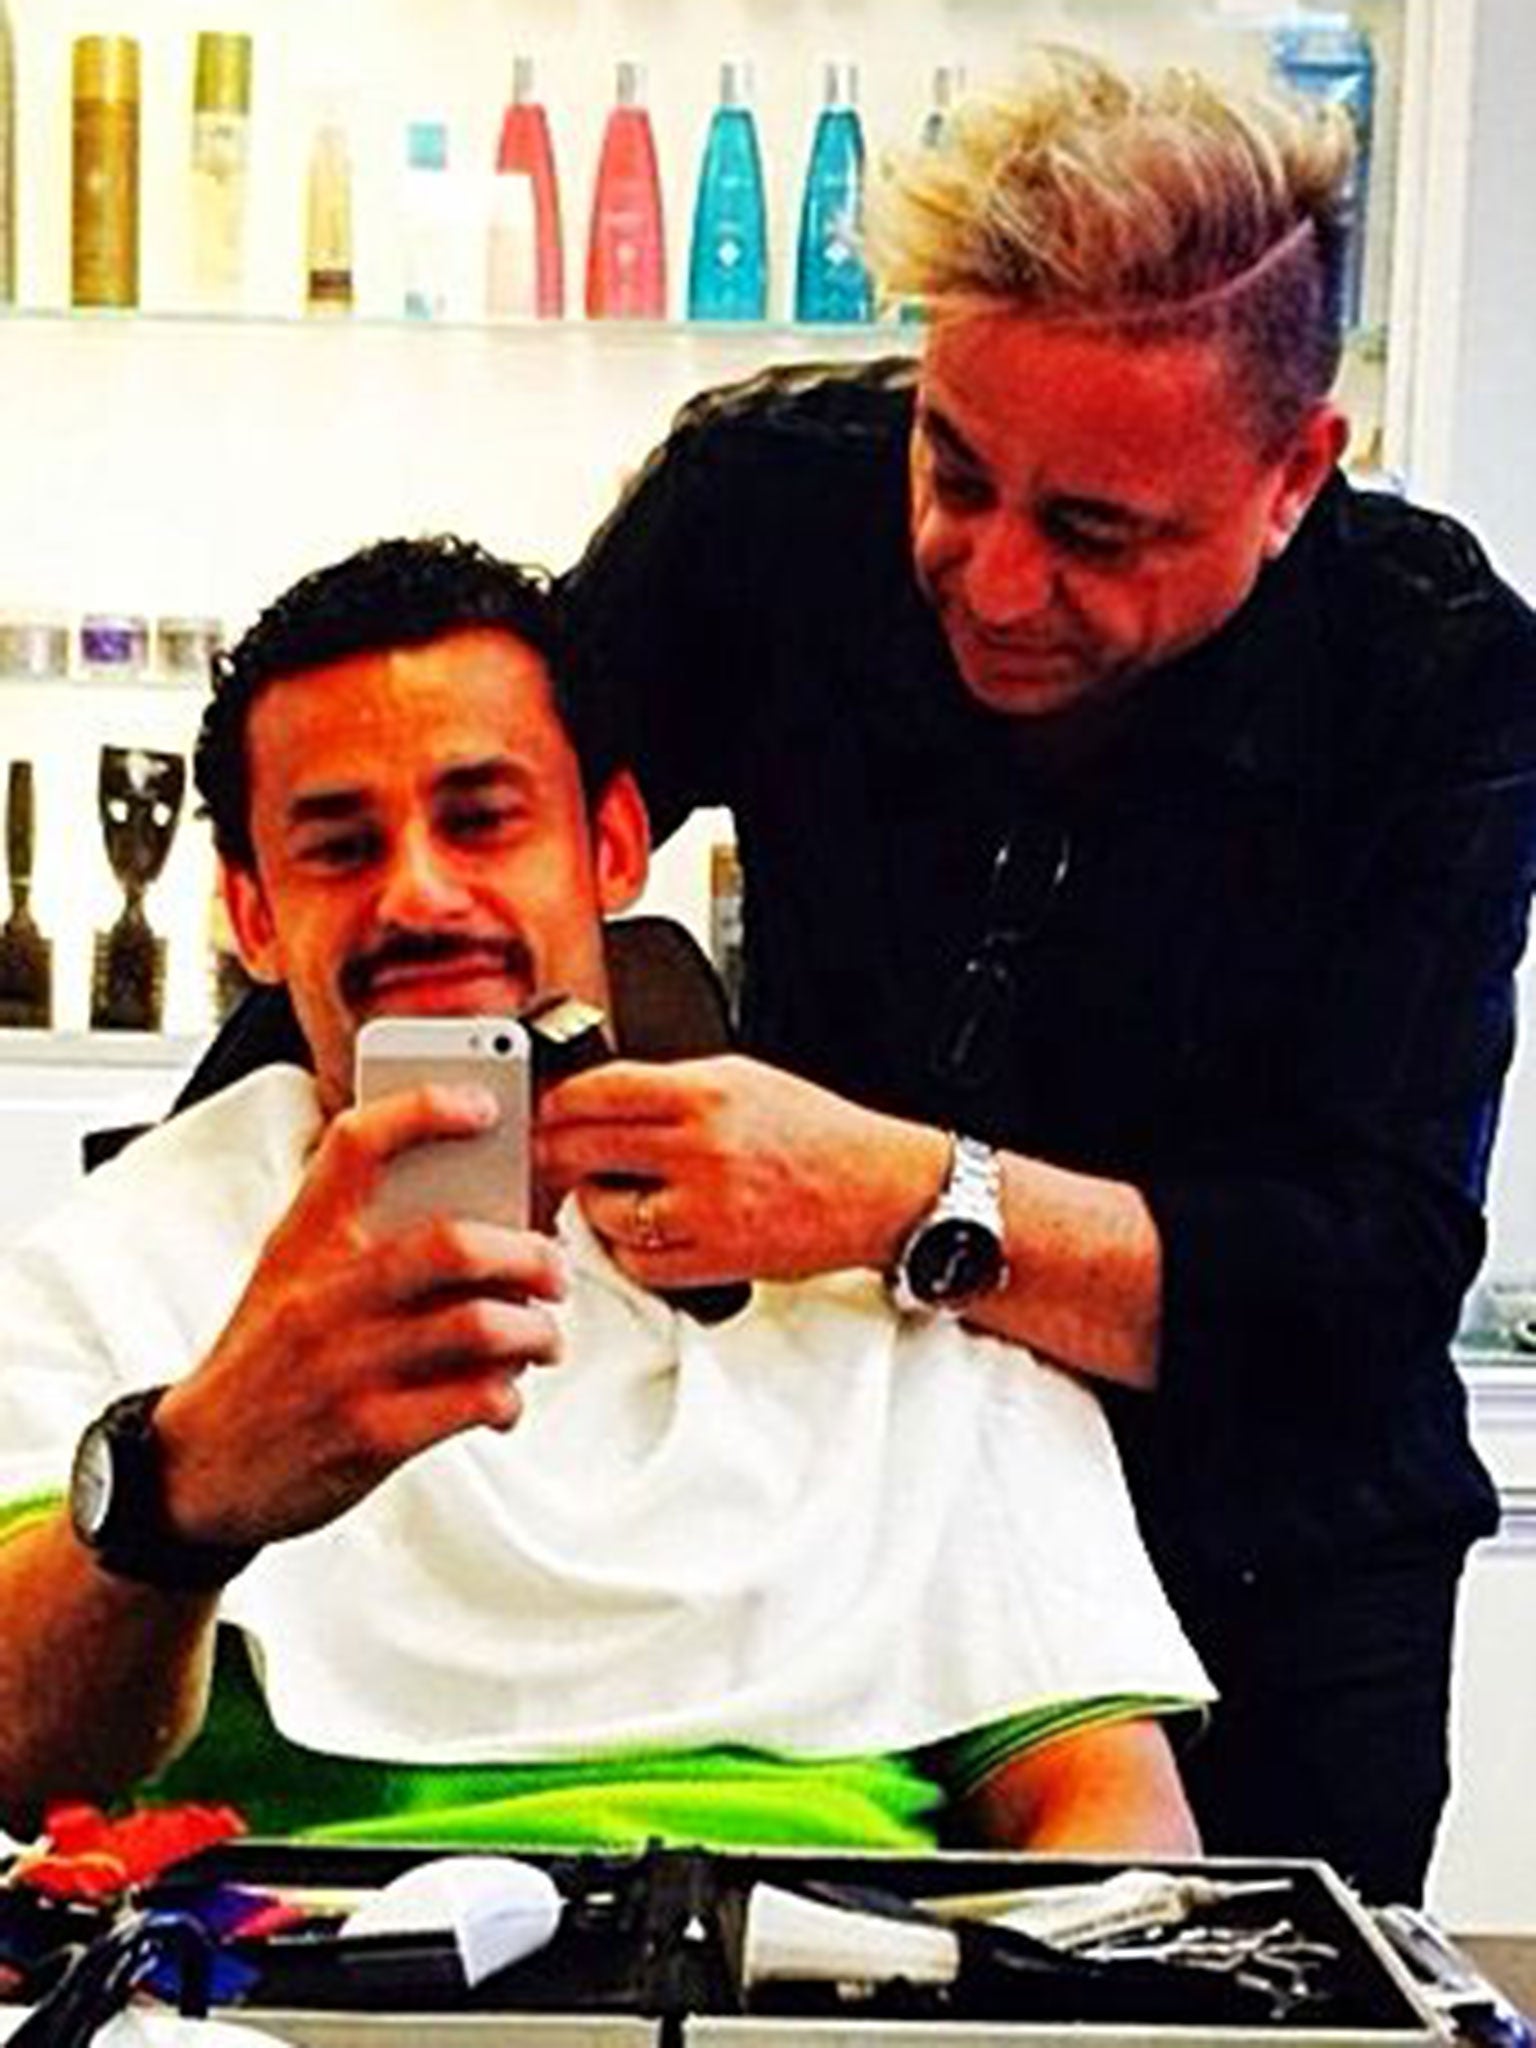 Fred getting his moustache at the barber shop